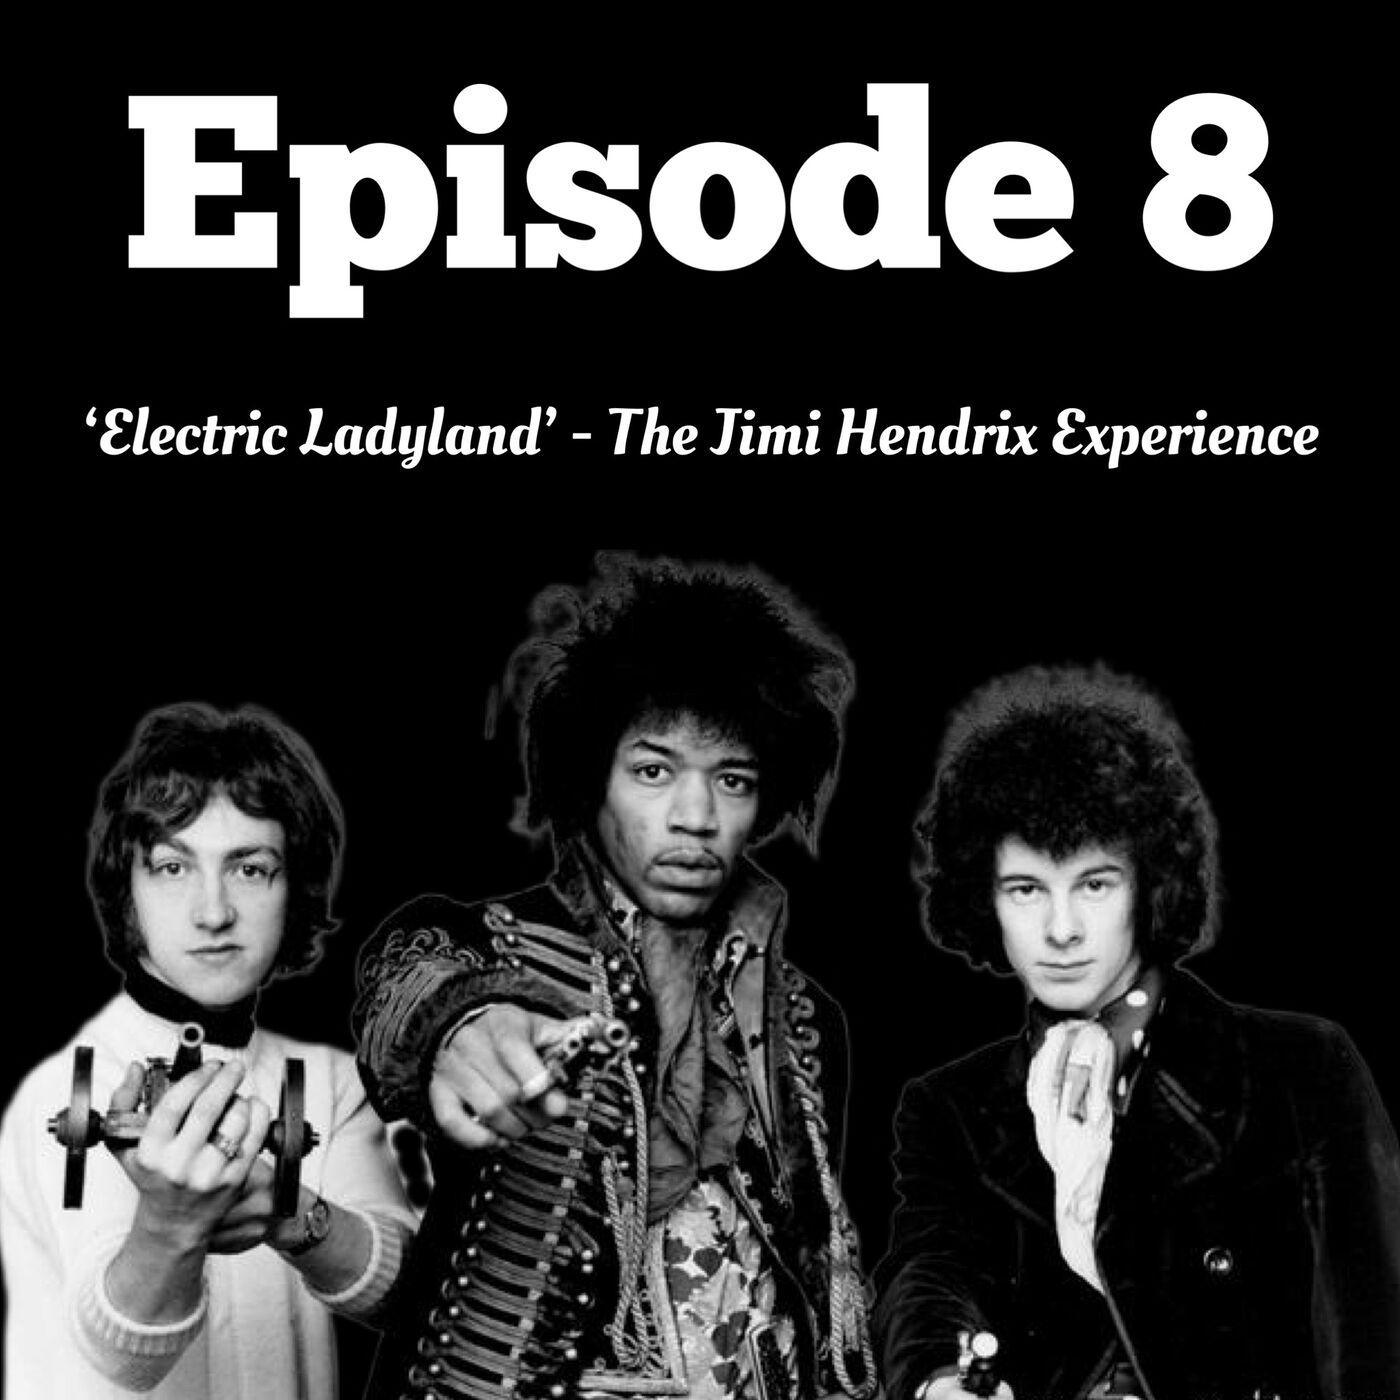 8. 'Electric Ladyland' - The Jimi Hendrix Experience (1968)